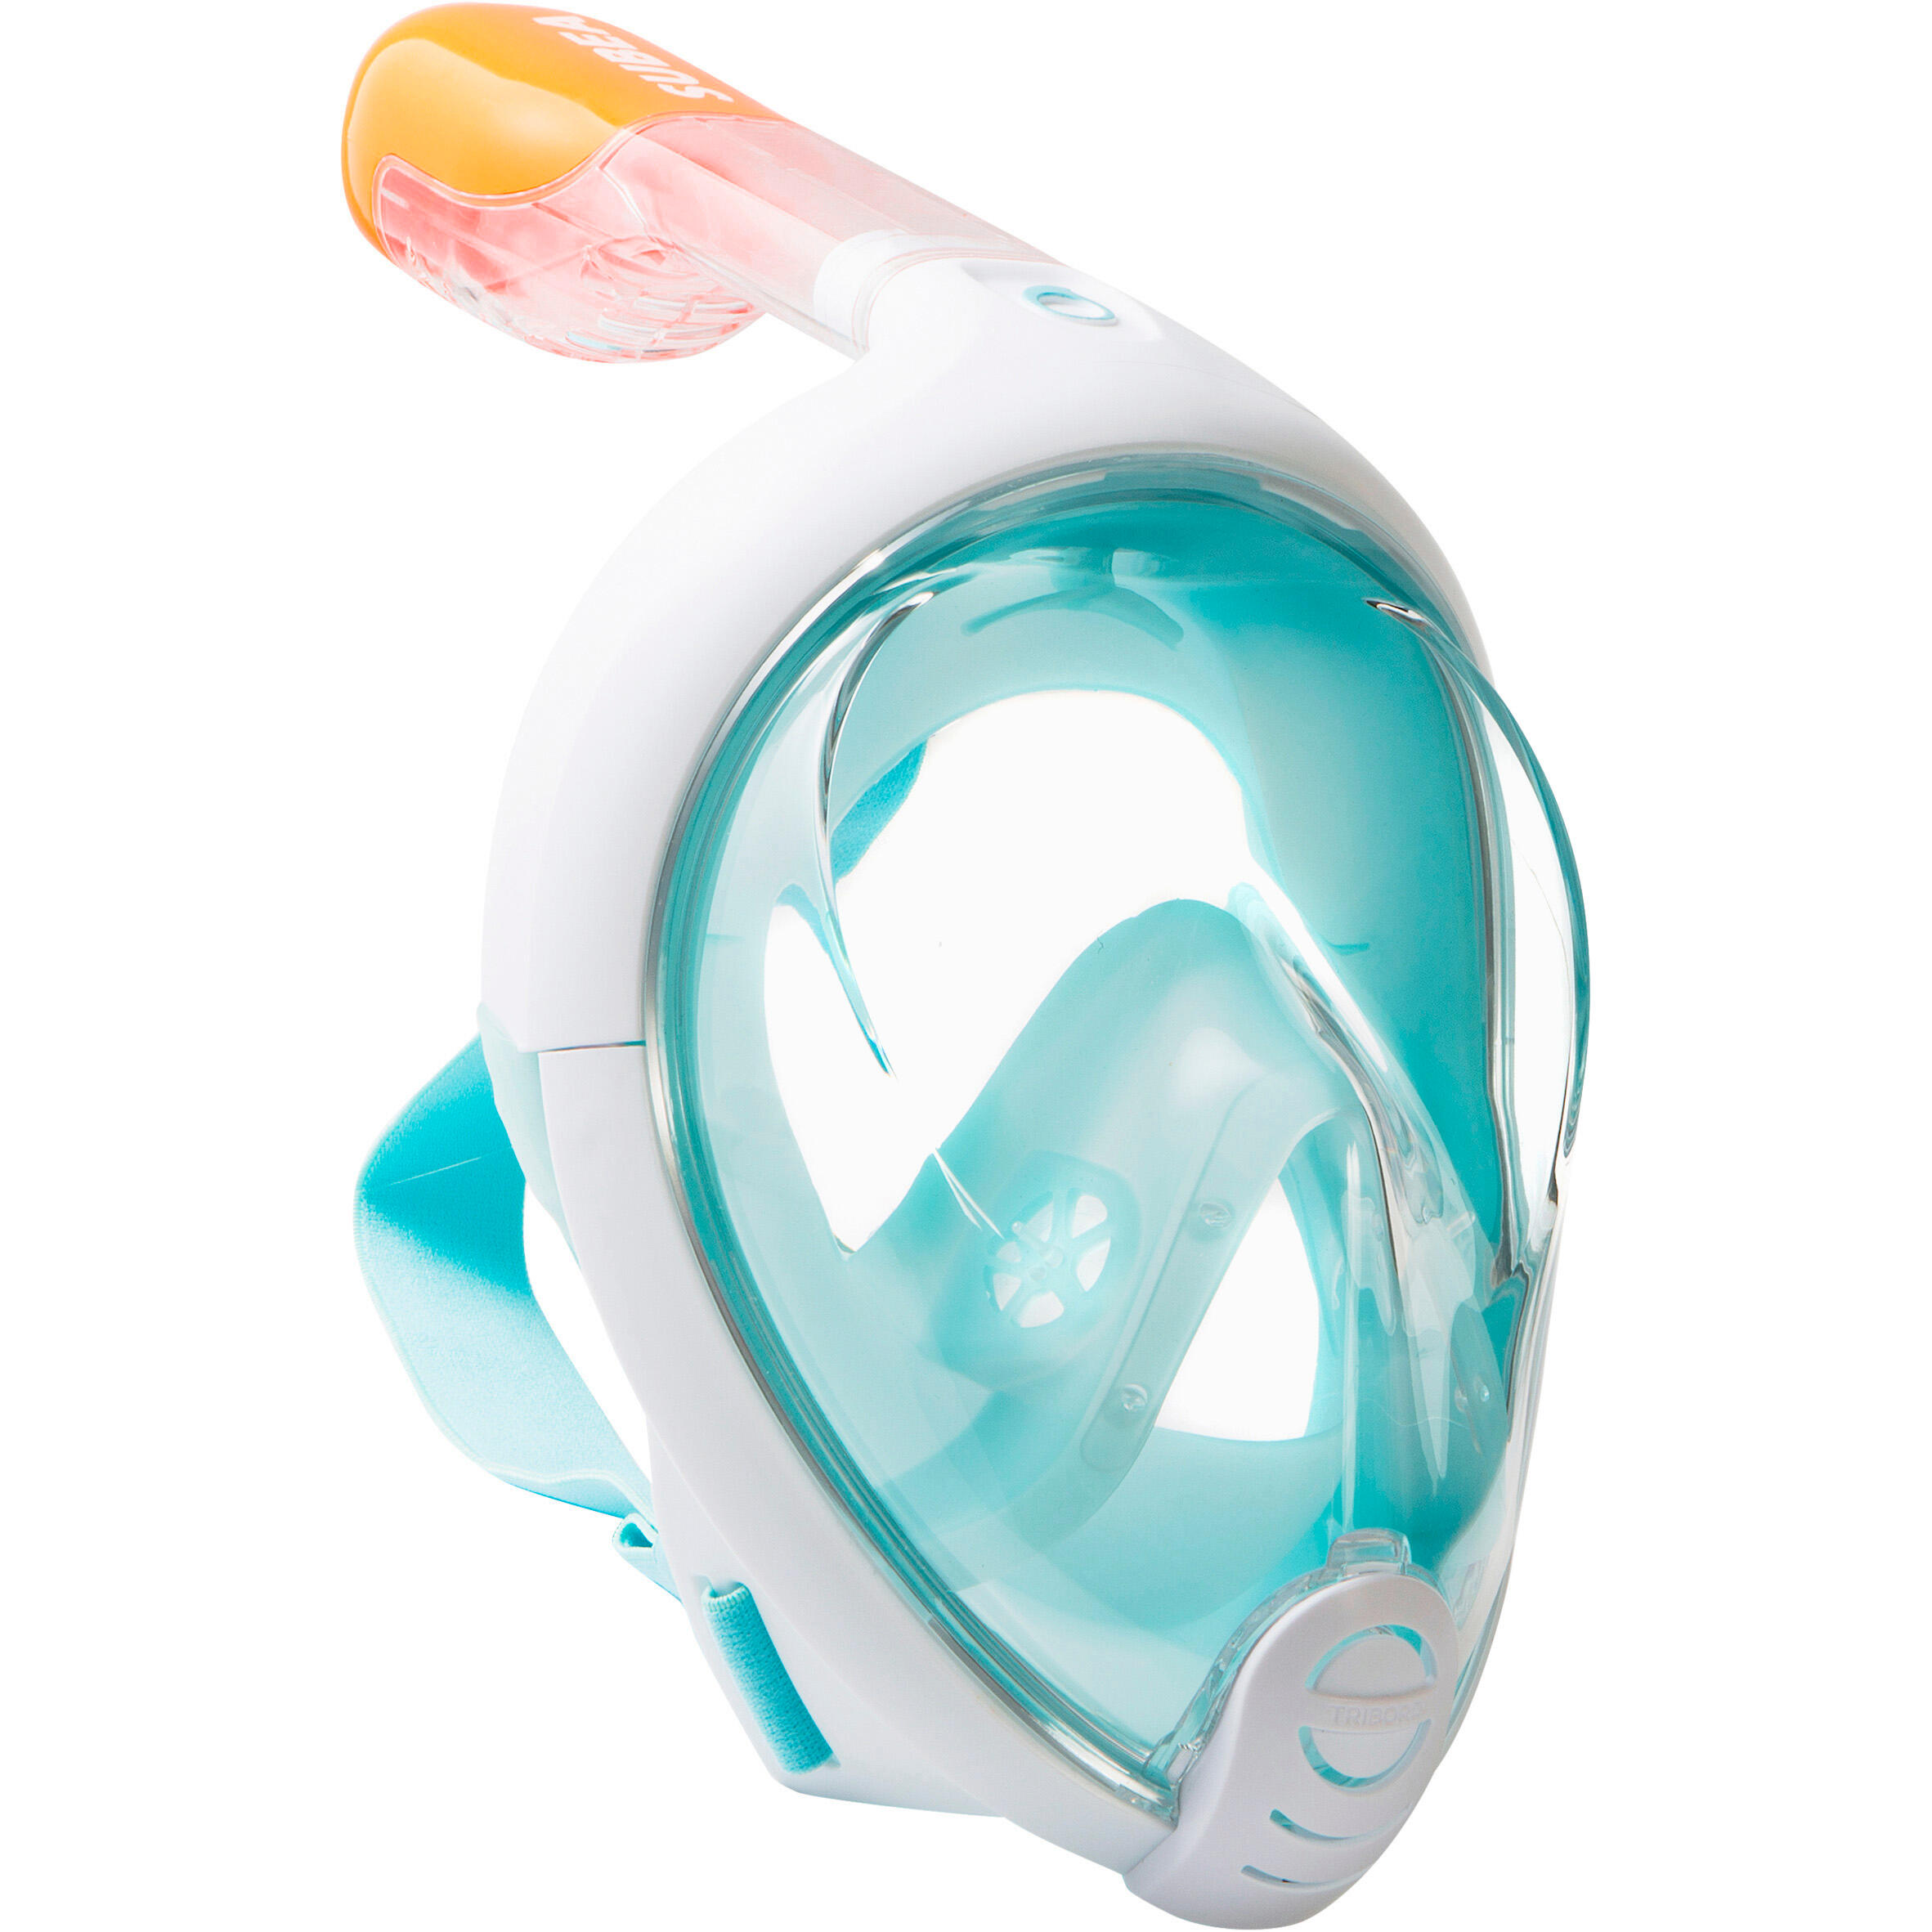 Easybreath Surface Snorkelling Mask 